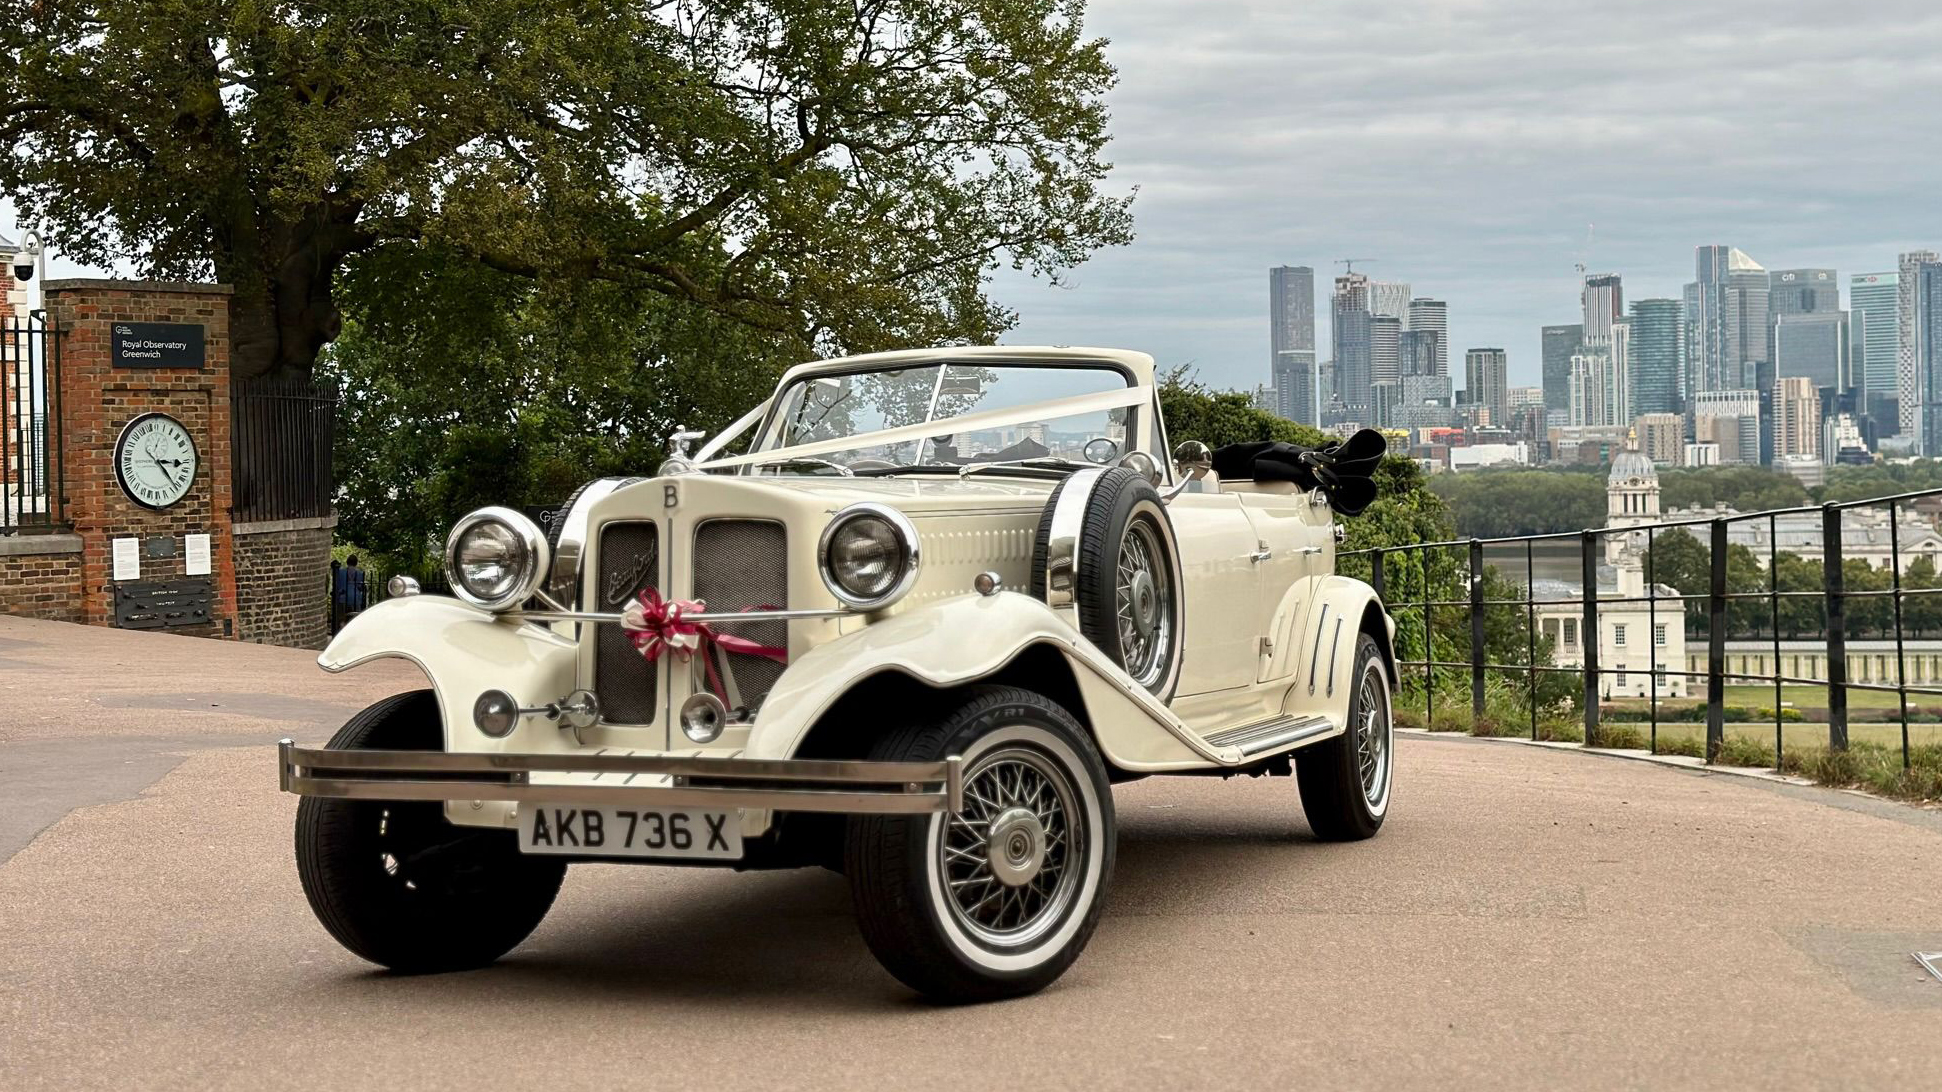 Ivory vintage Beauford convertible with roof down decorated withivory ribbon and a burgundy bow at a local Ilford wedding with view of the city of London in the background.